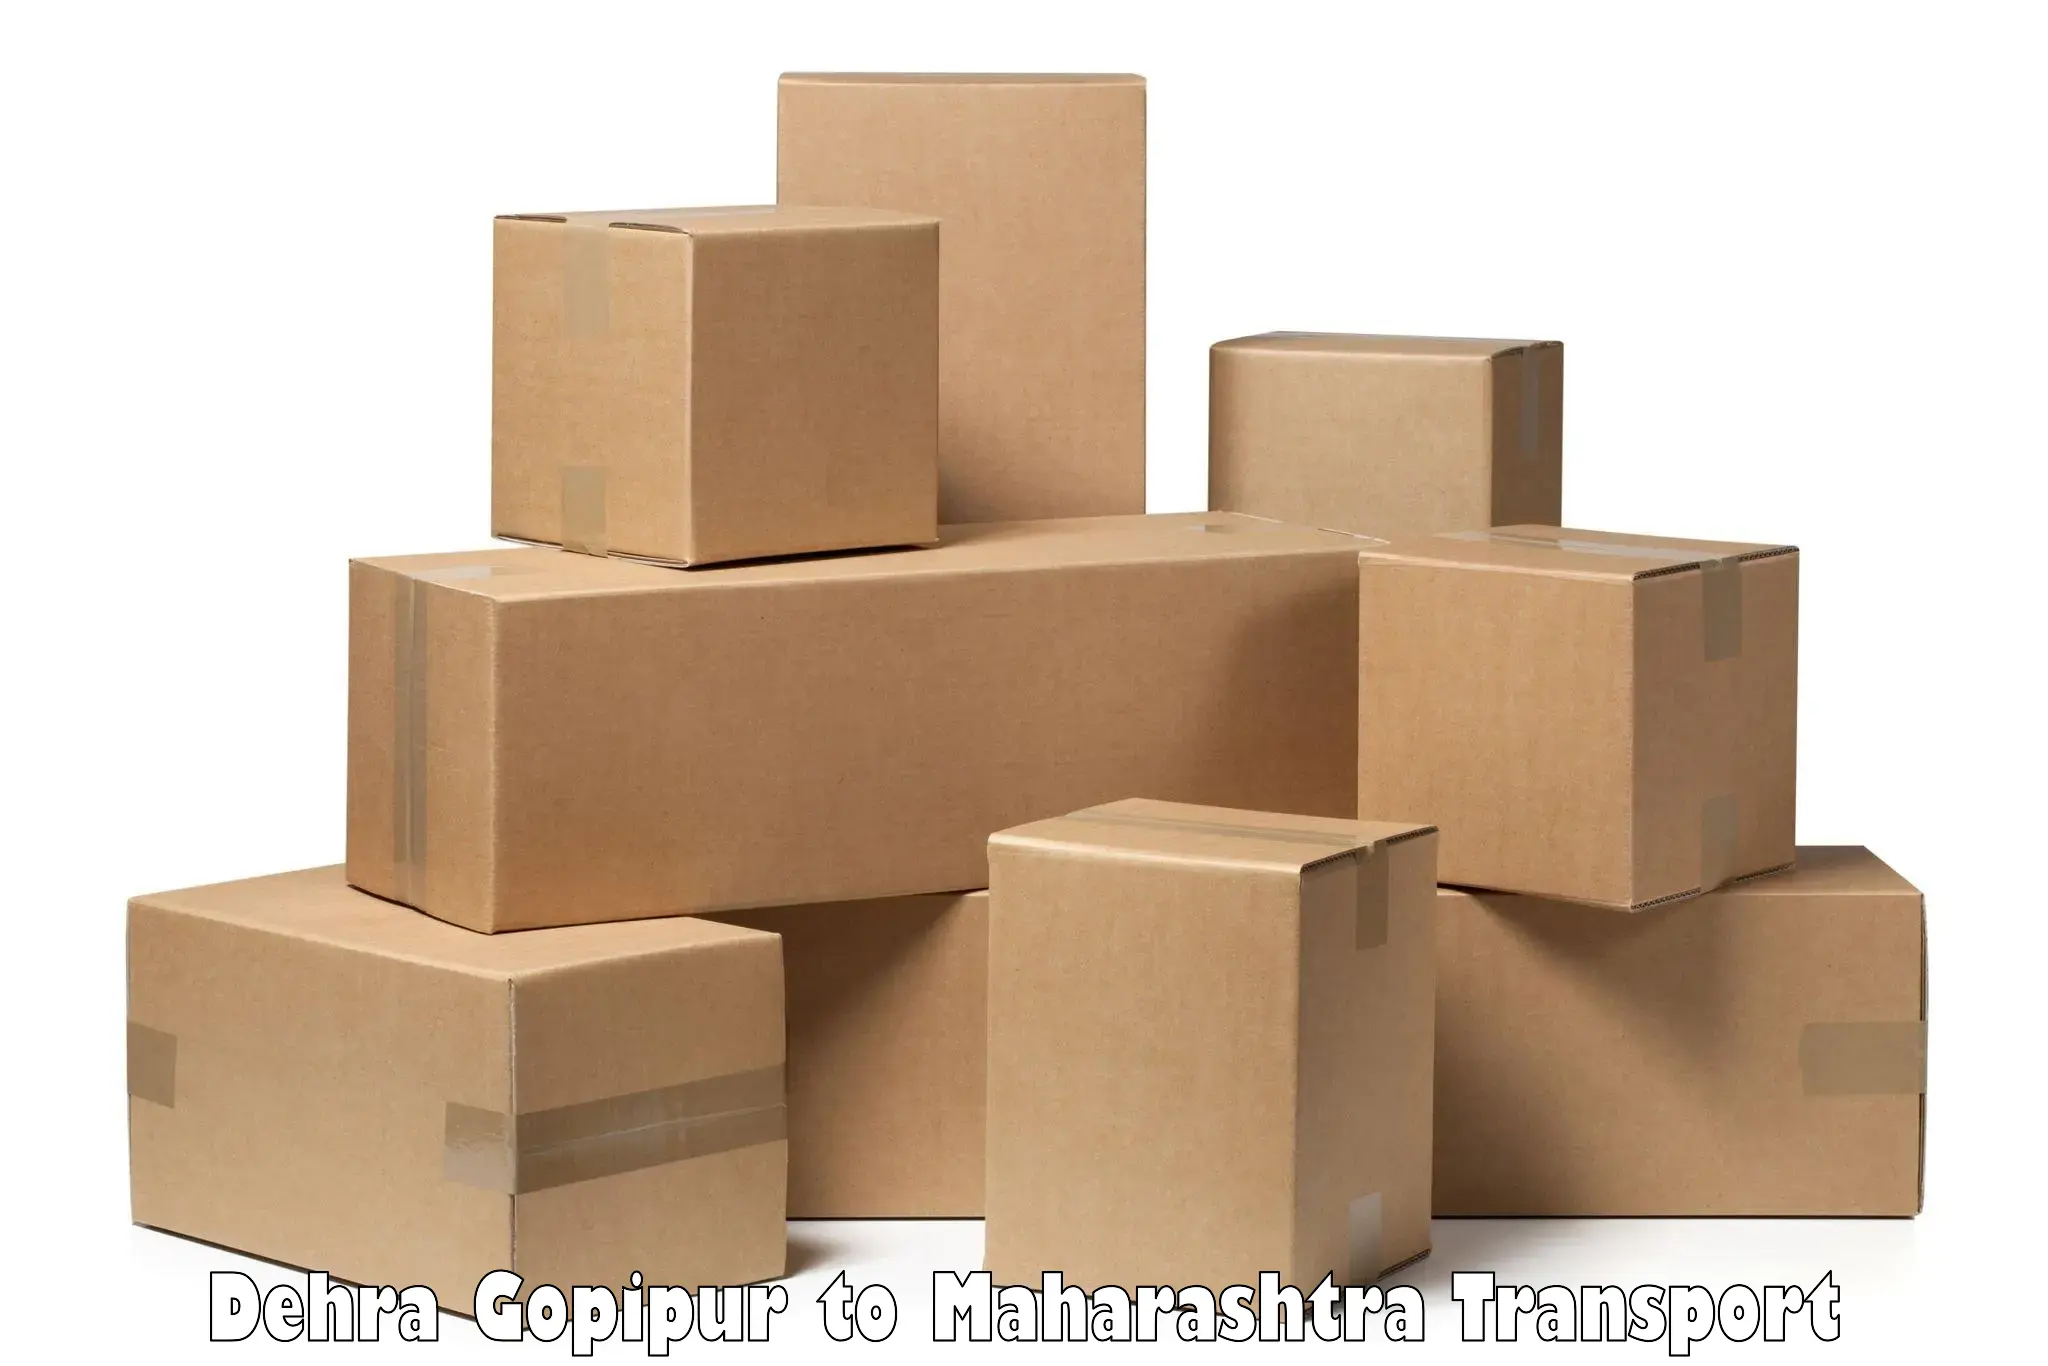 Vehicle courier services Dehra Gopipur to Raigarh Maharashtra